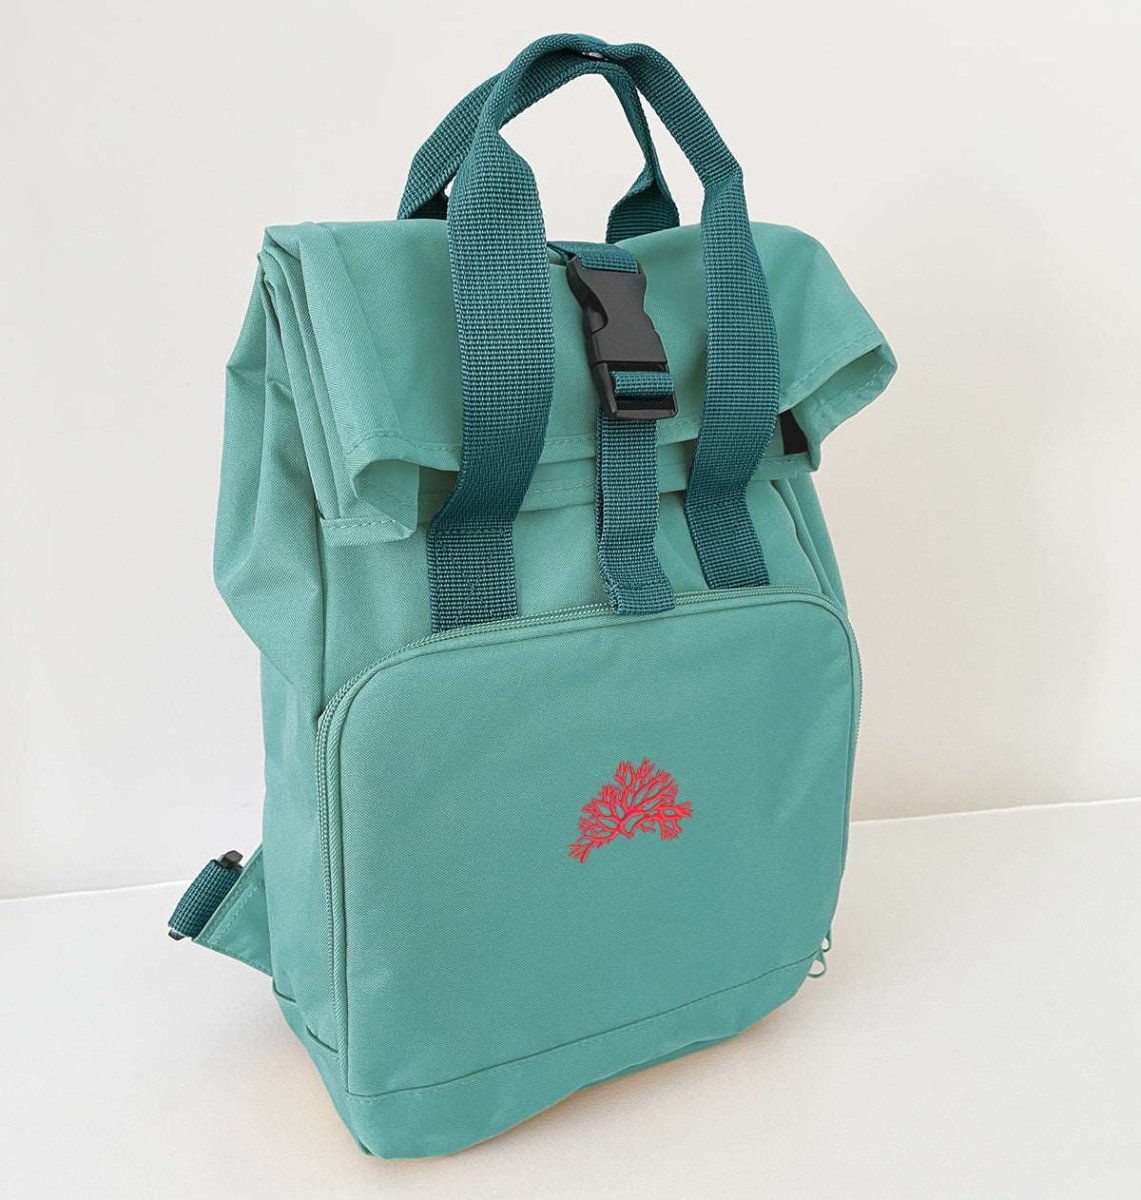 Coral Mini Roll-top Recycled Backpack - Blue Panda